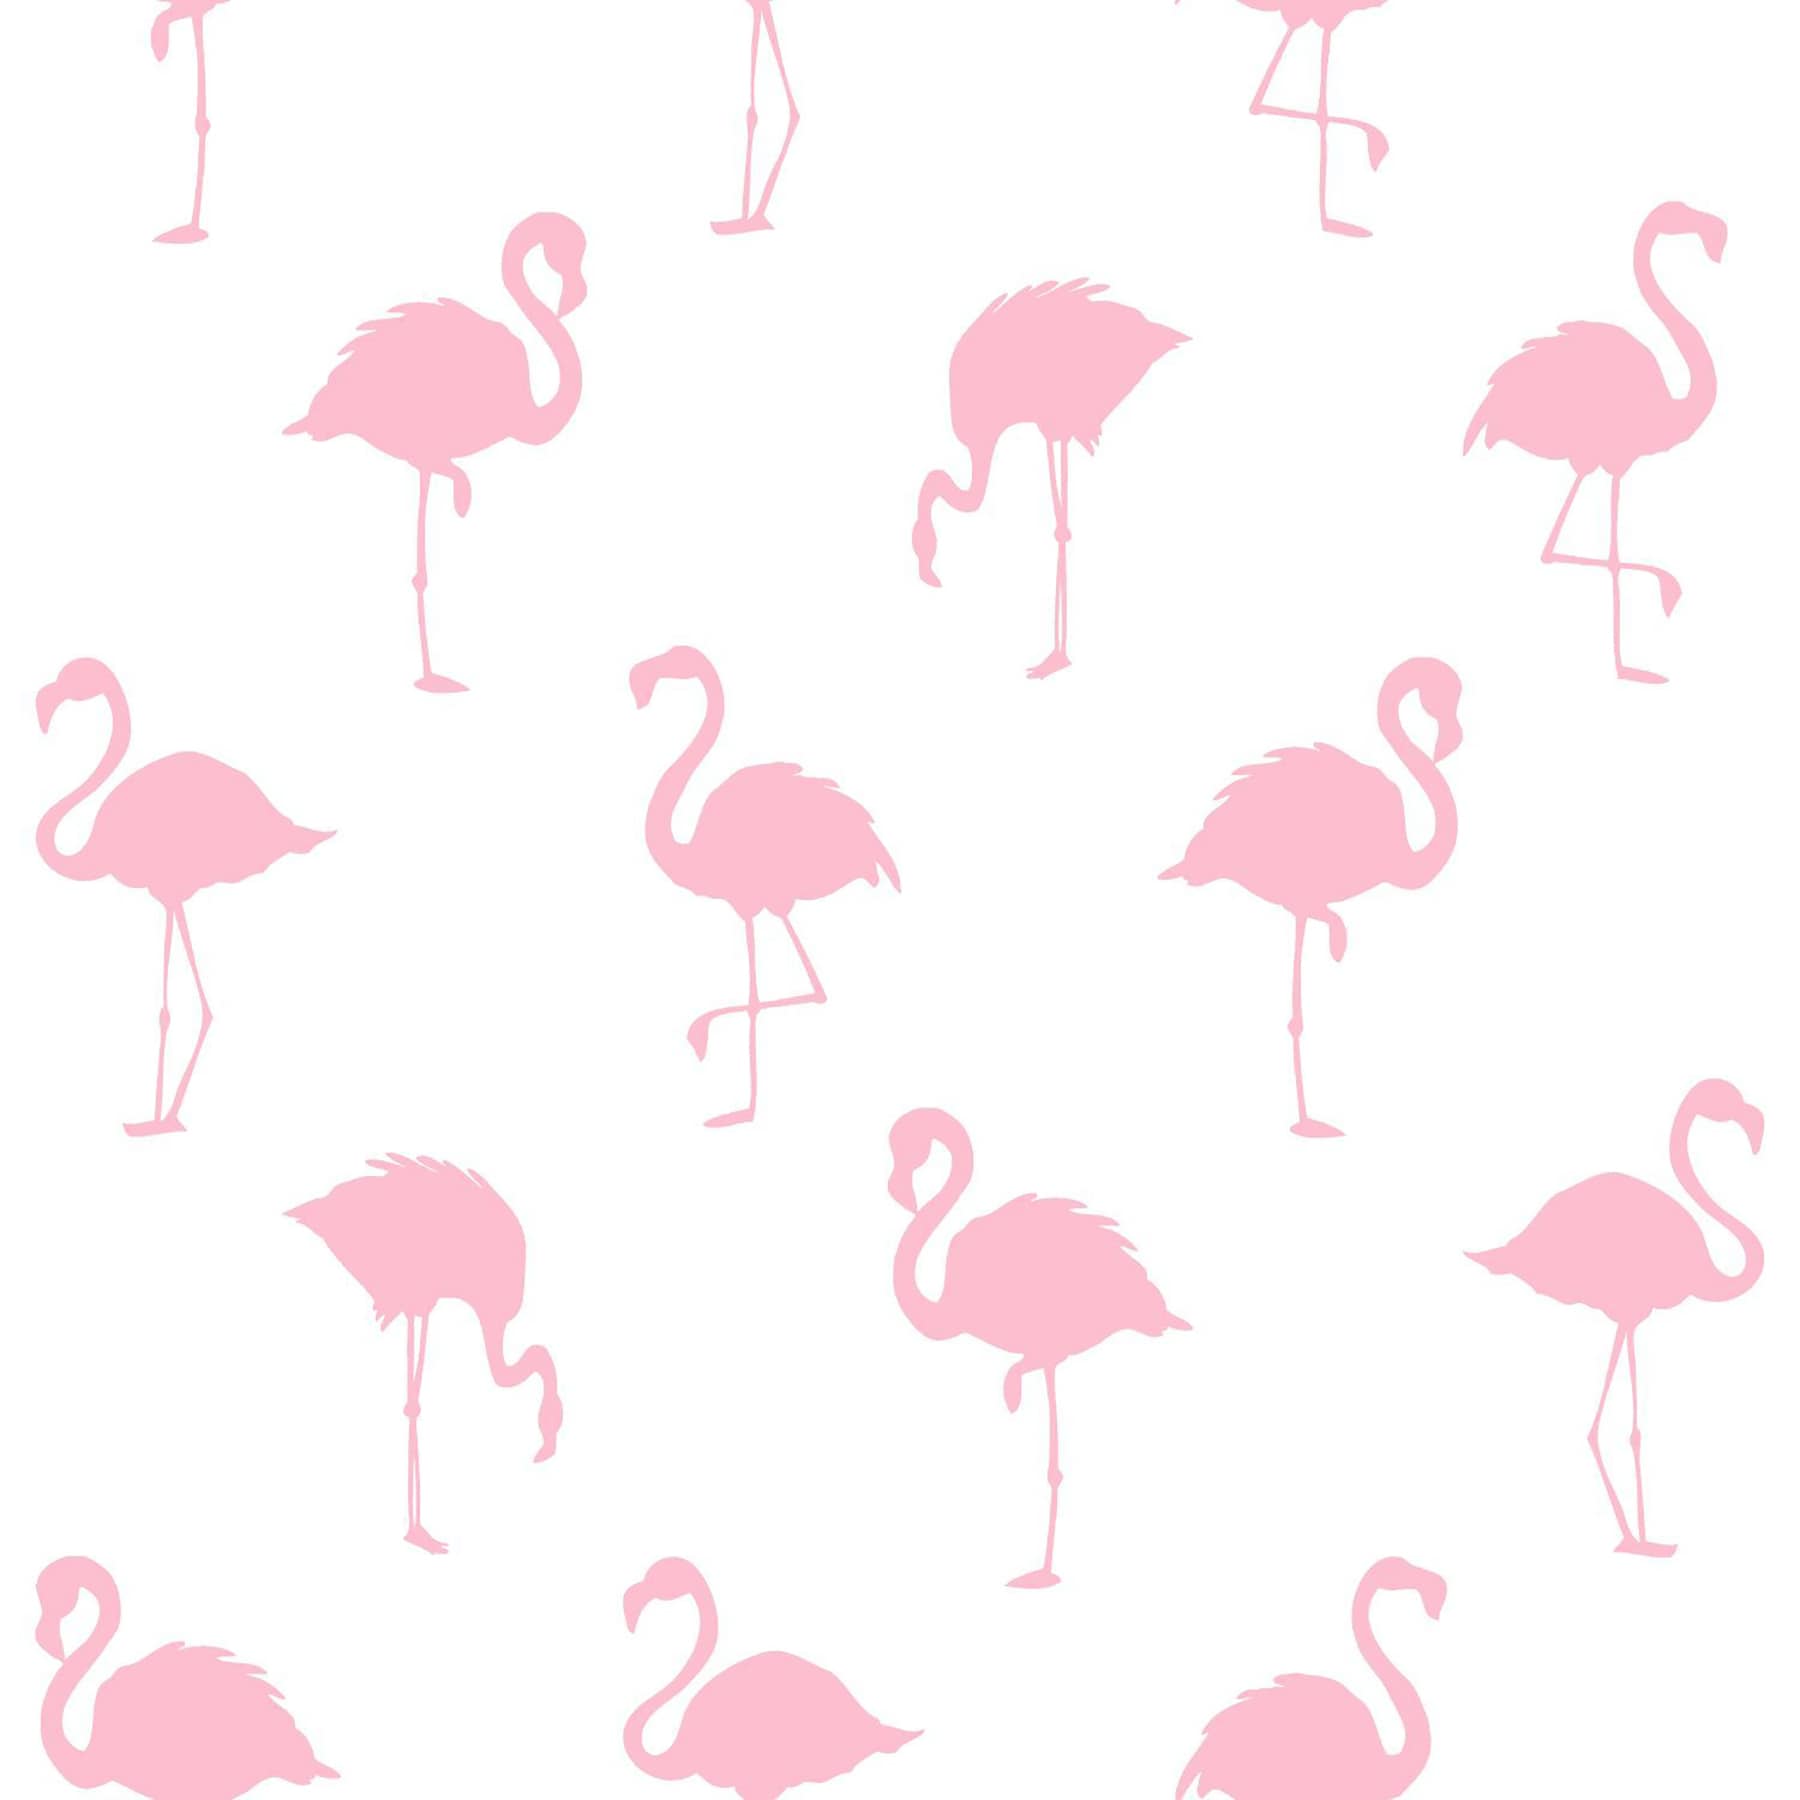 ESTA Home Design Department 56.4 Sq Ft Pink Non Woven Birds Unpasted Wallpaper In The Wallpaper Department At Lowes.com